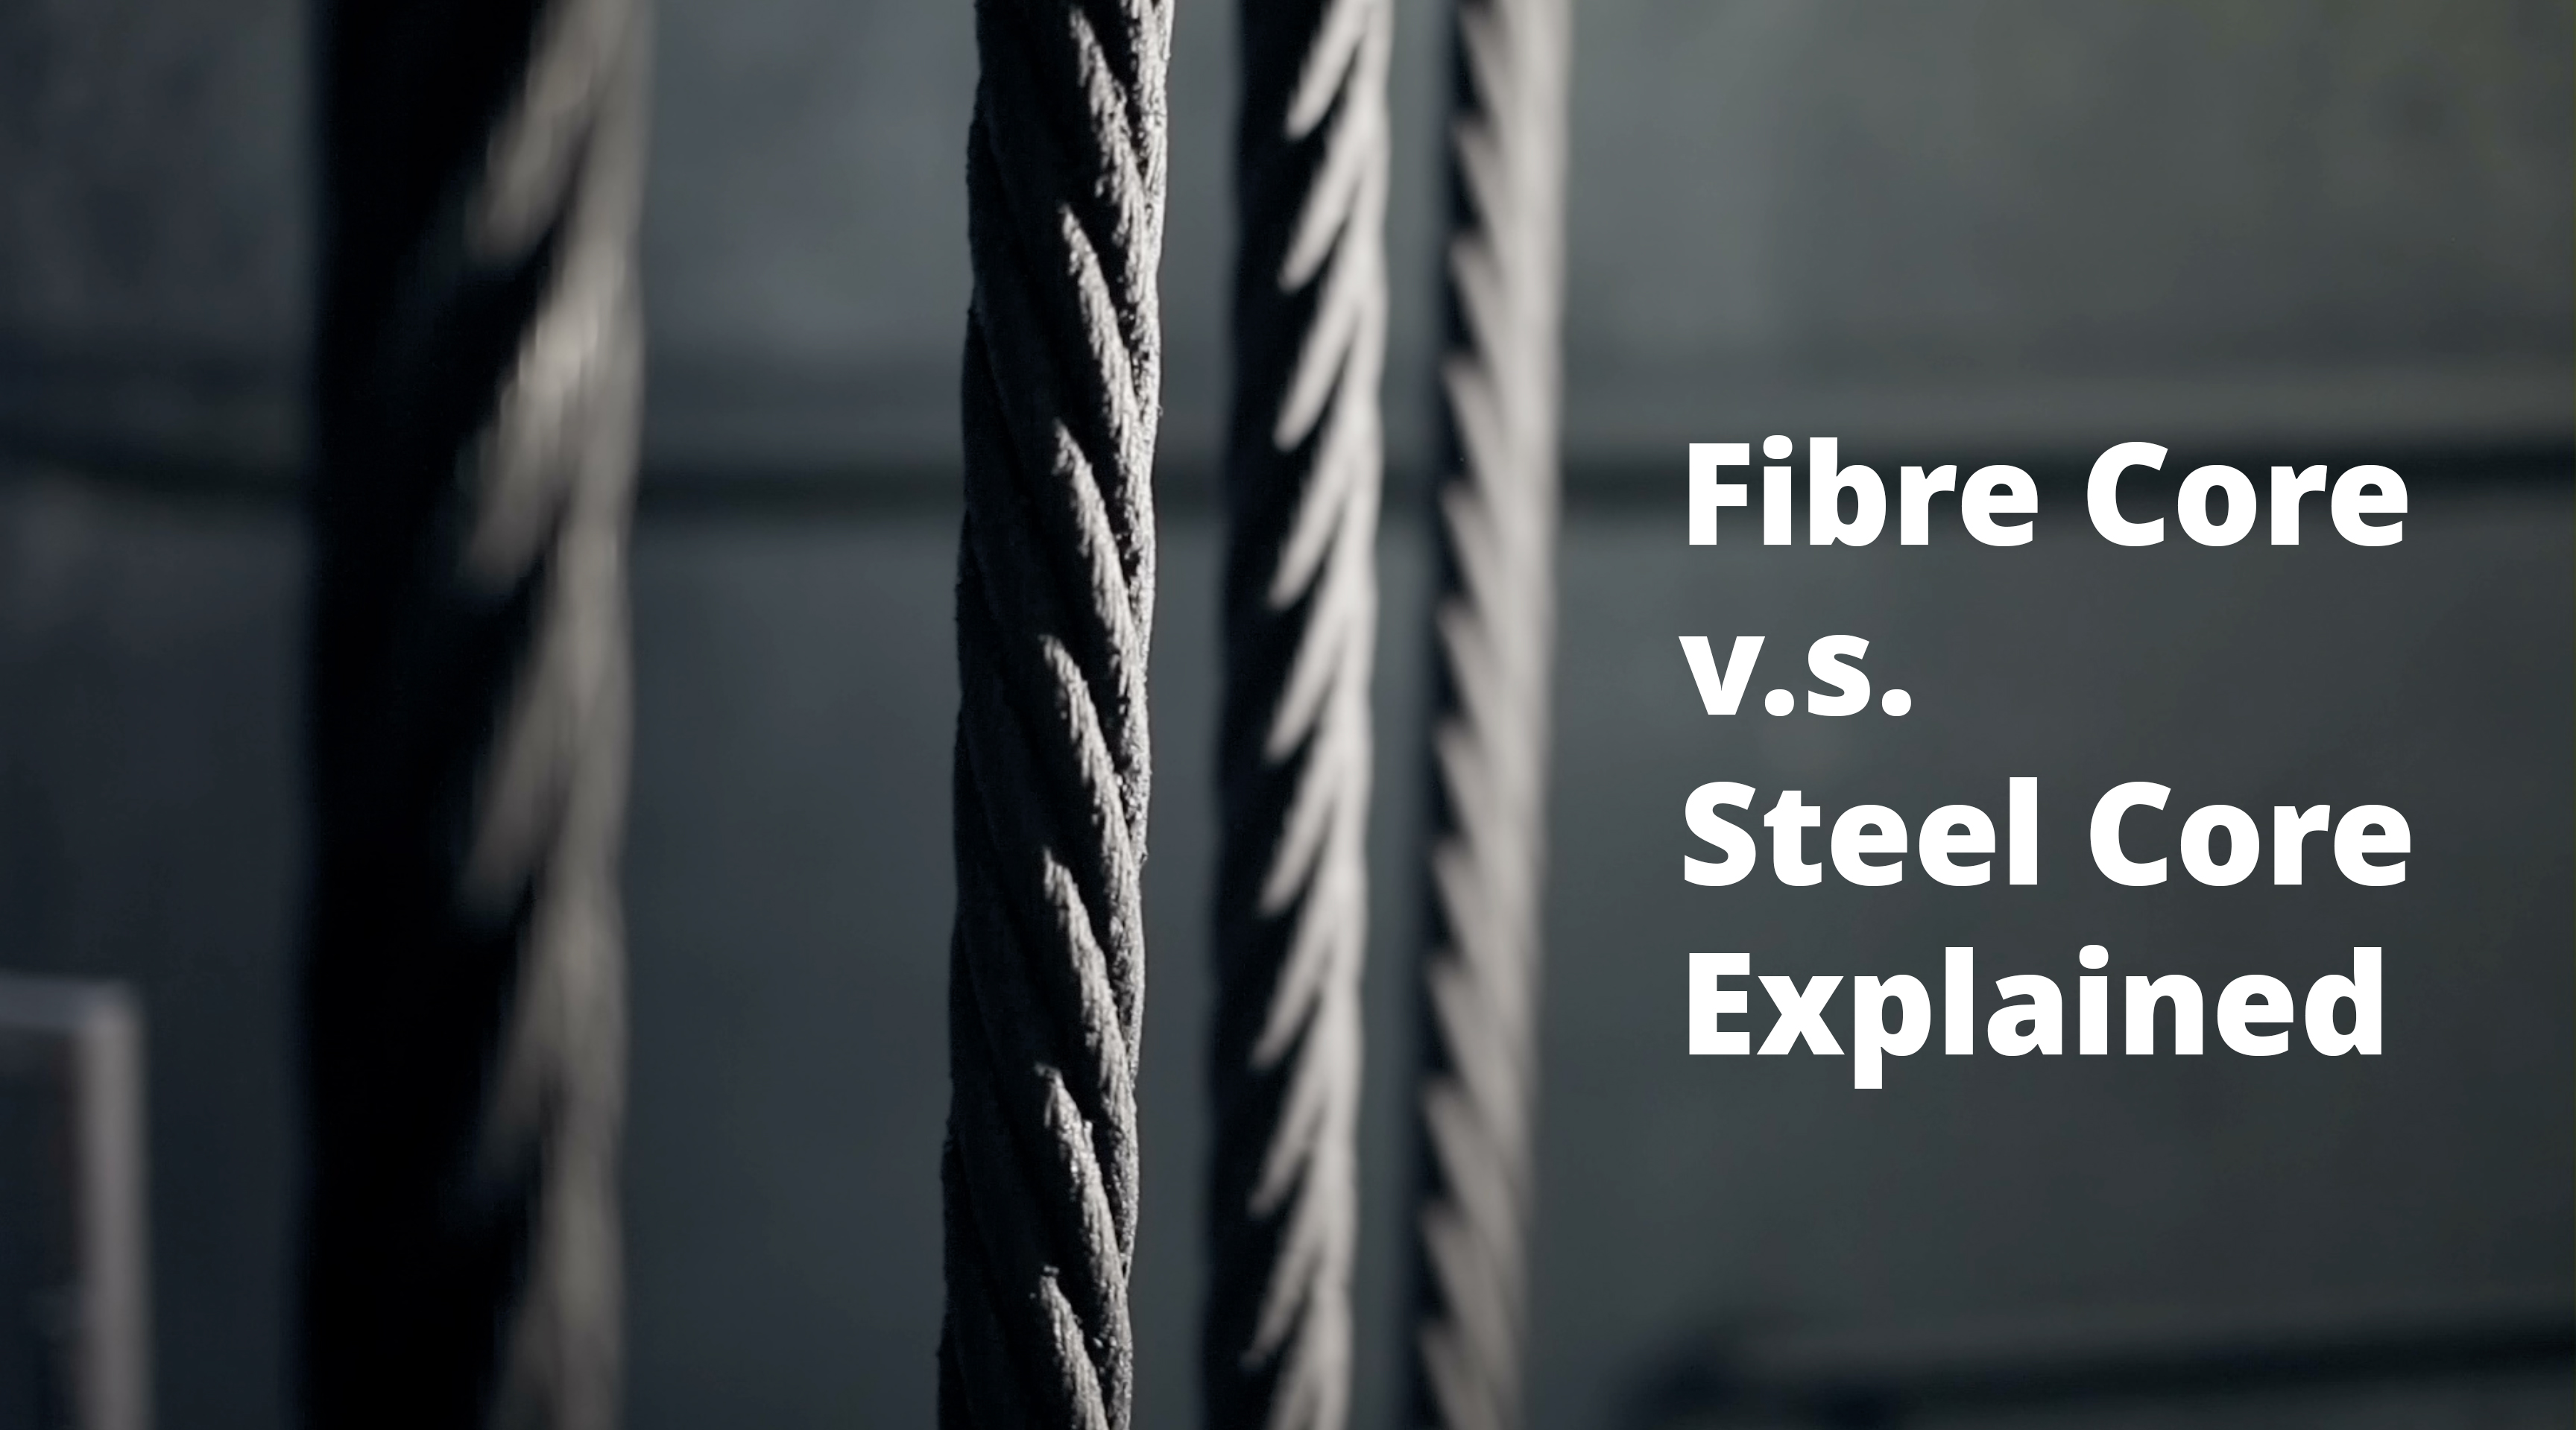 Thumbnail image for the podcast "Fibre core vs Steel core explained" featuring an image of steel wire rope & text containing the podcast title.